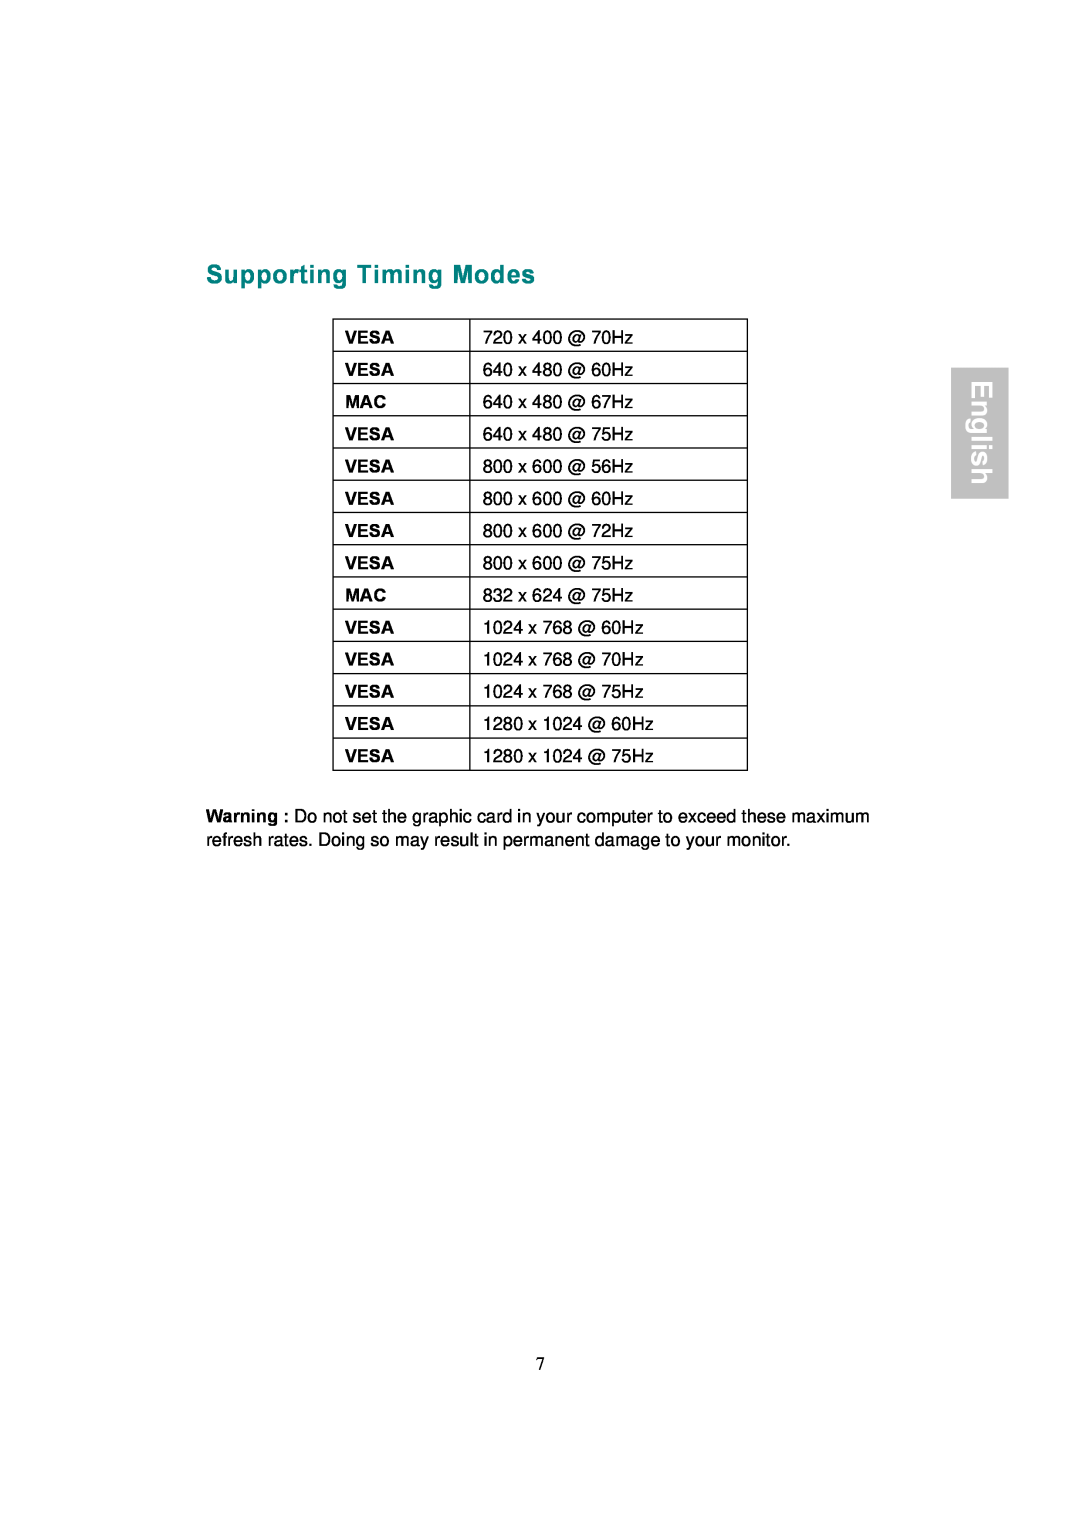 AOC 177S manual Supporting Timing Modes, English 